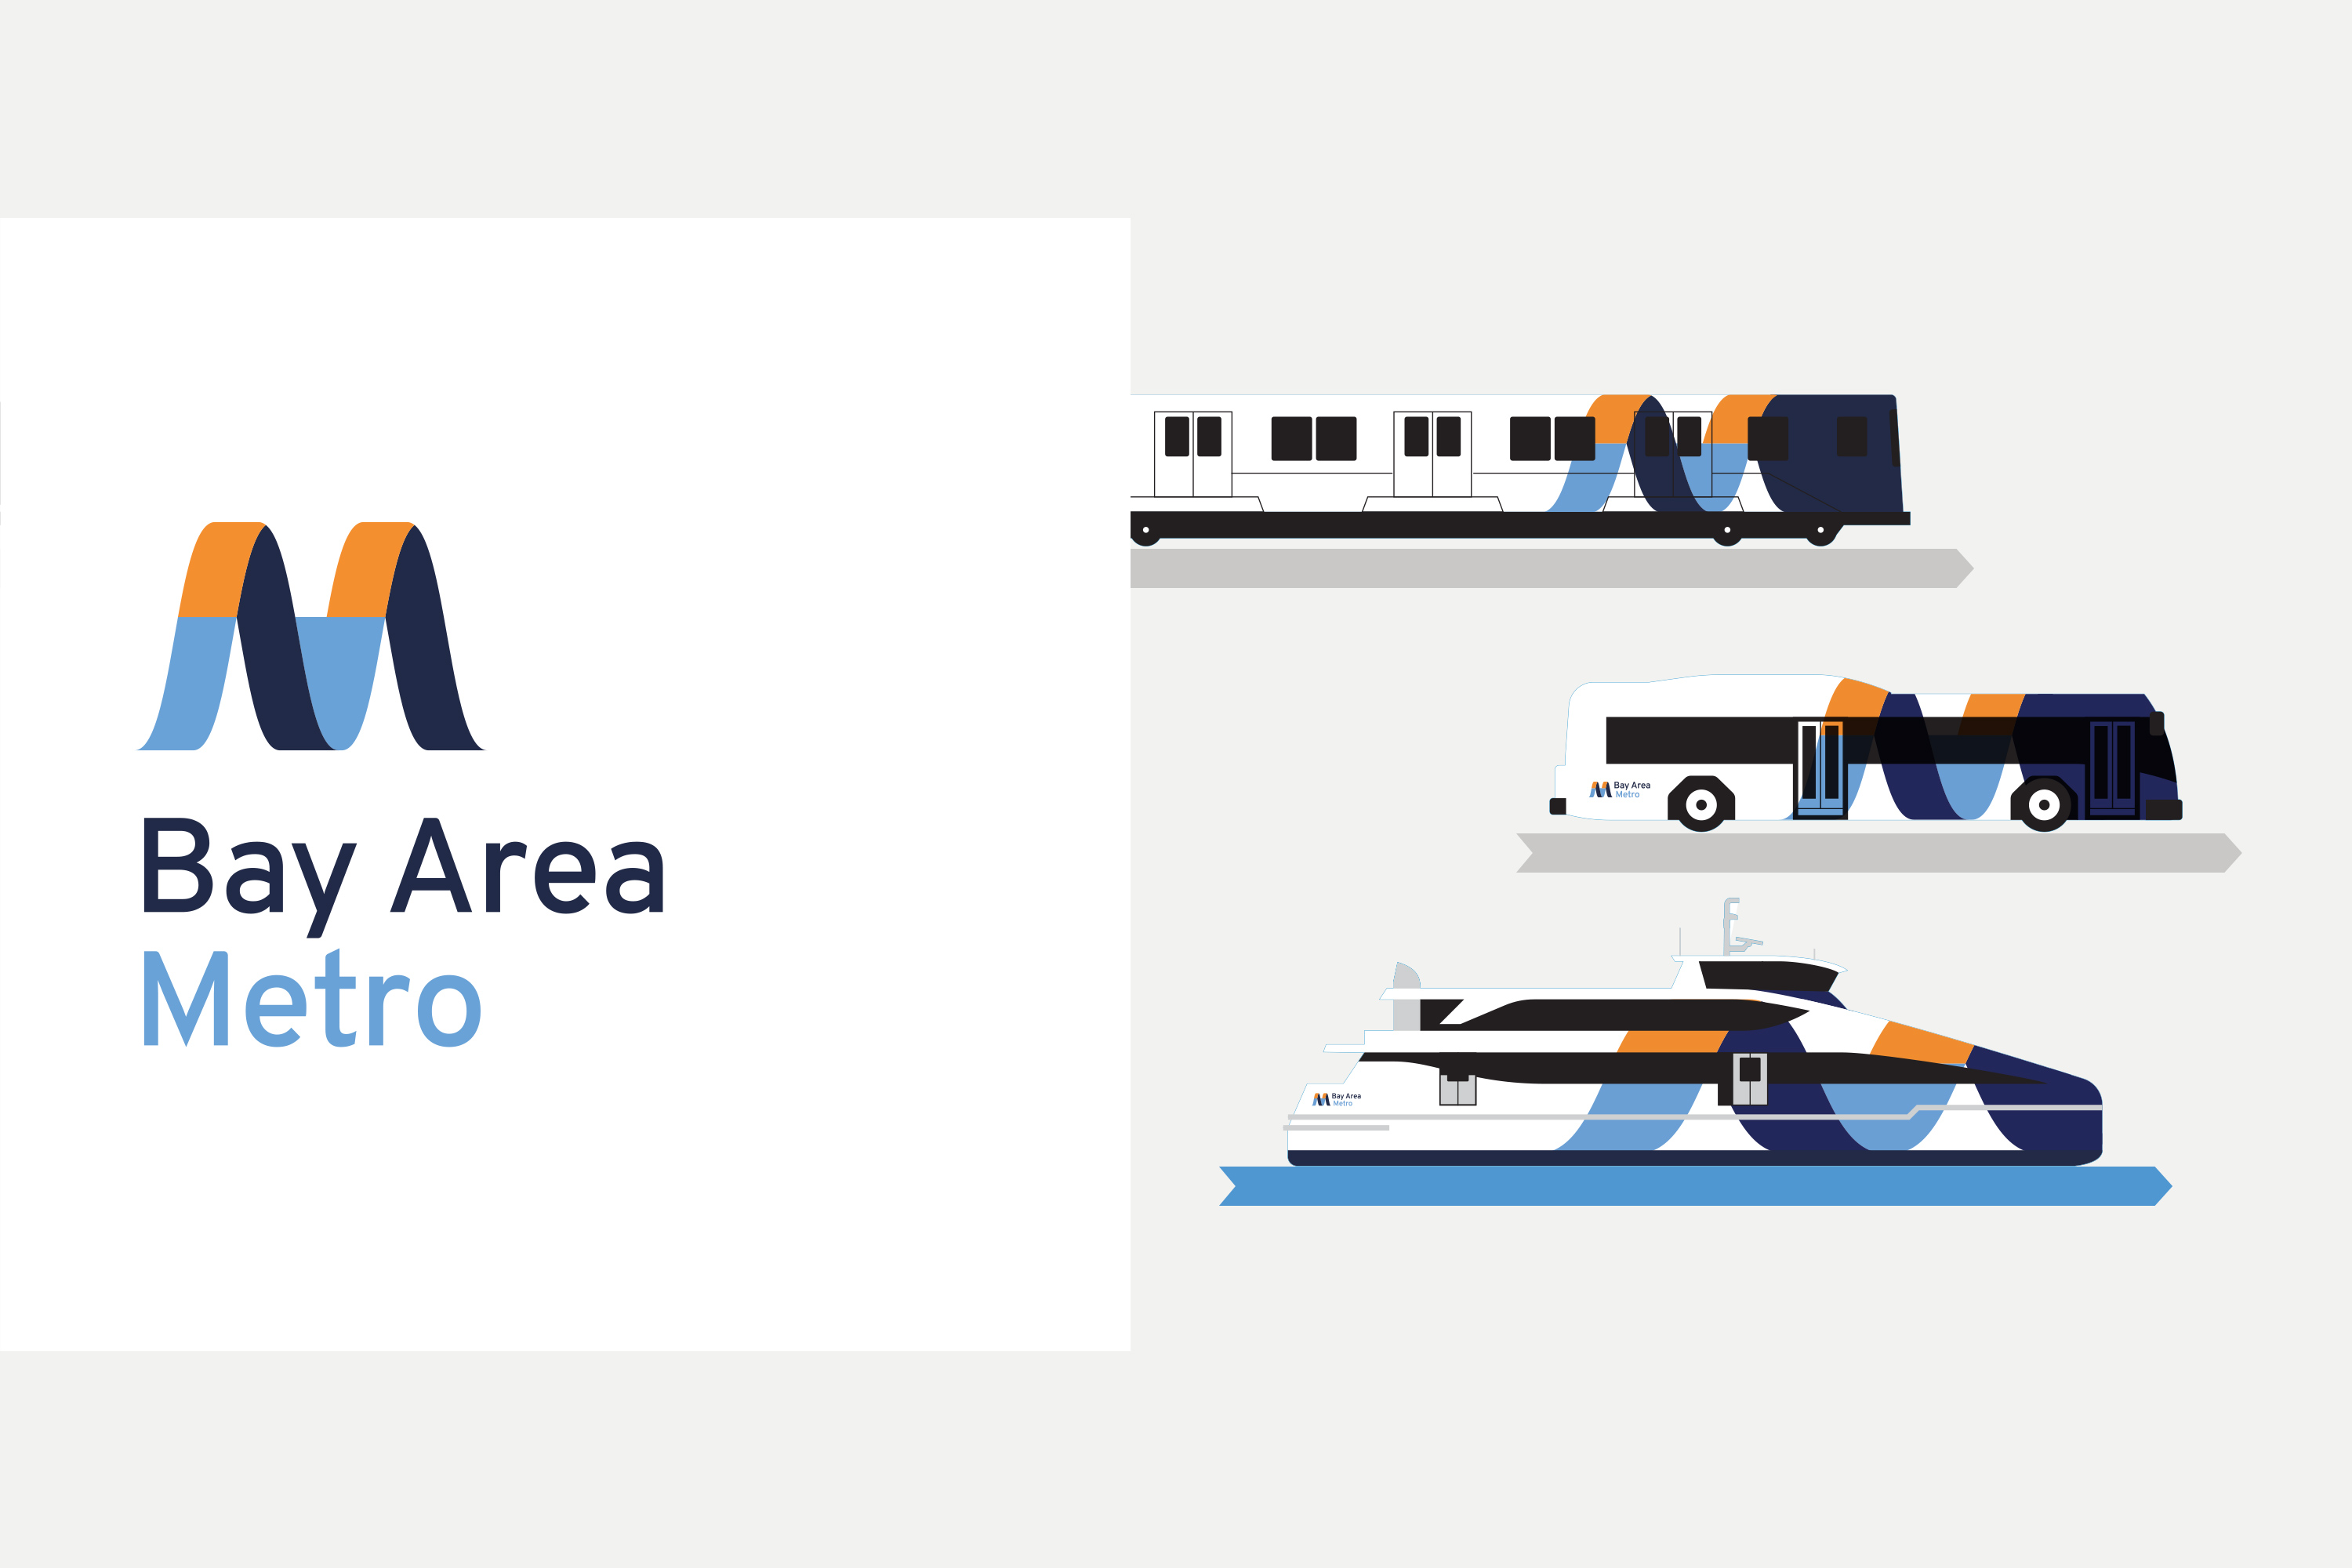 A logo reads 'Bay Area Metro' with a geometric 'M' in blue and orange, with illustrations of transit vehicles adorned with the same colors and branding